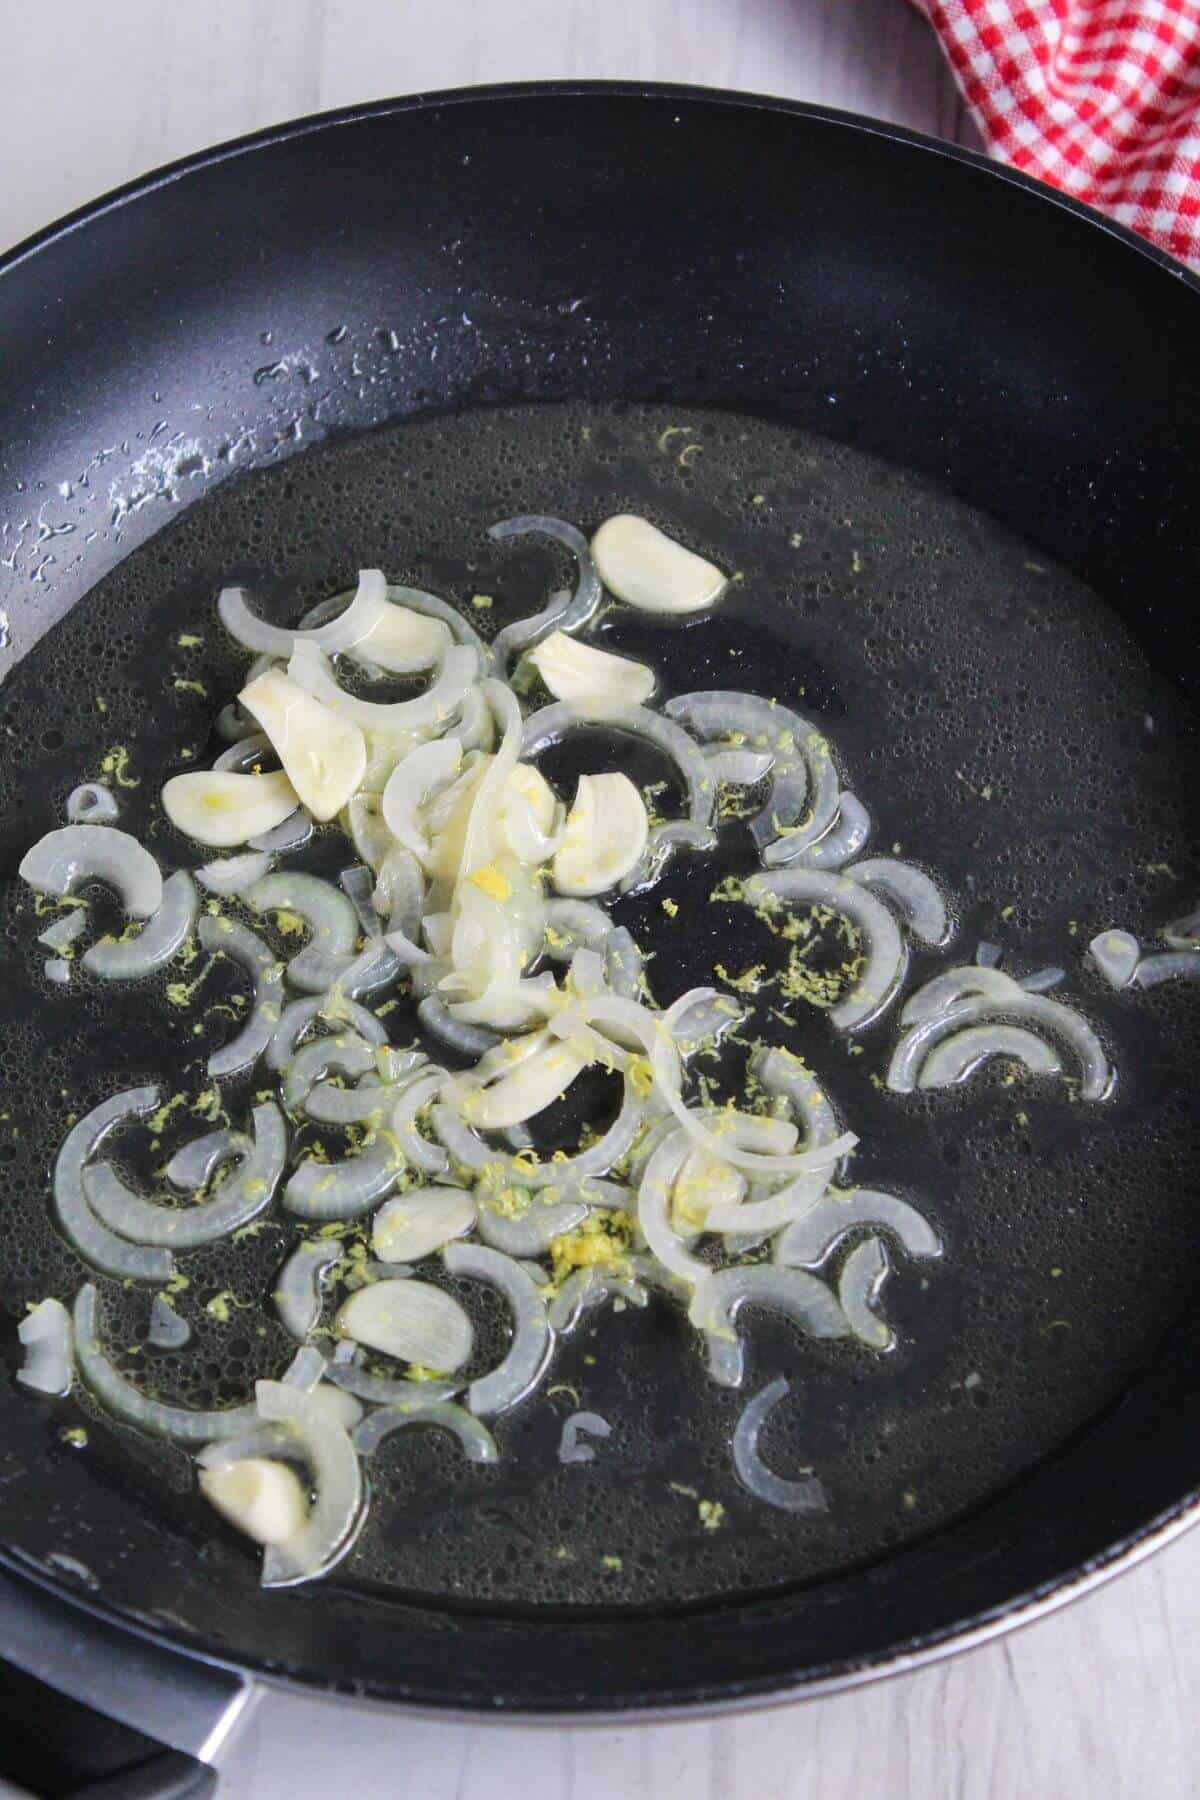 Sliced garlic and onions sautéing in oil in a black frying pan on a stove, with visible sizzling.